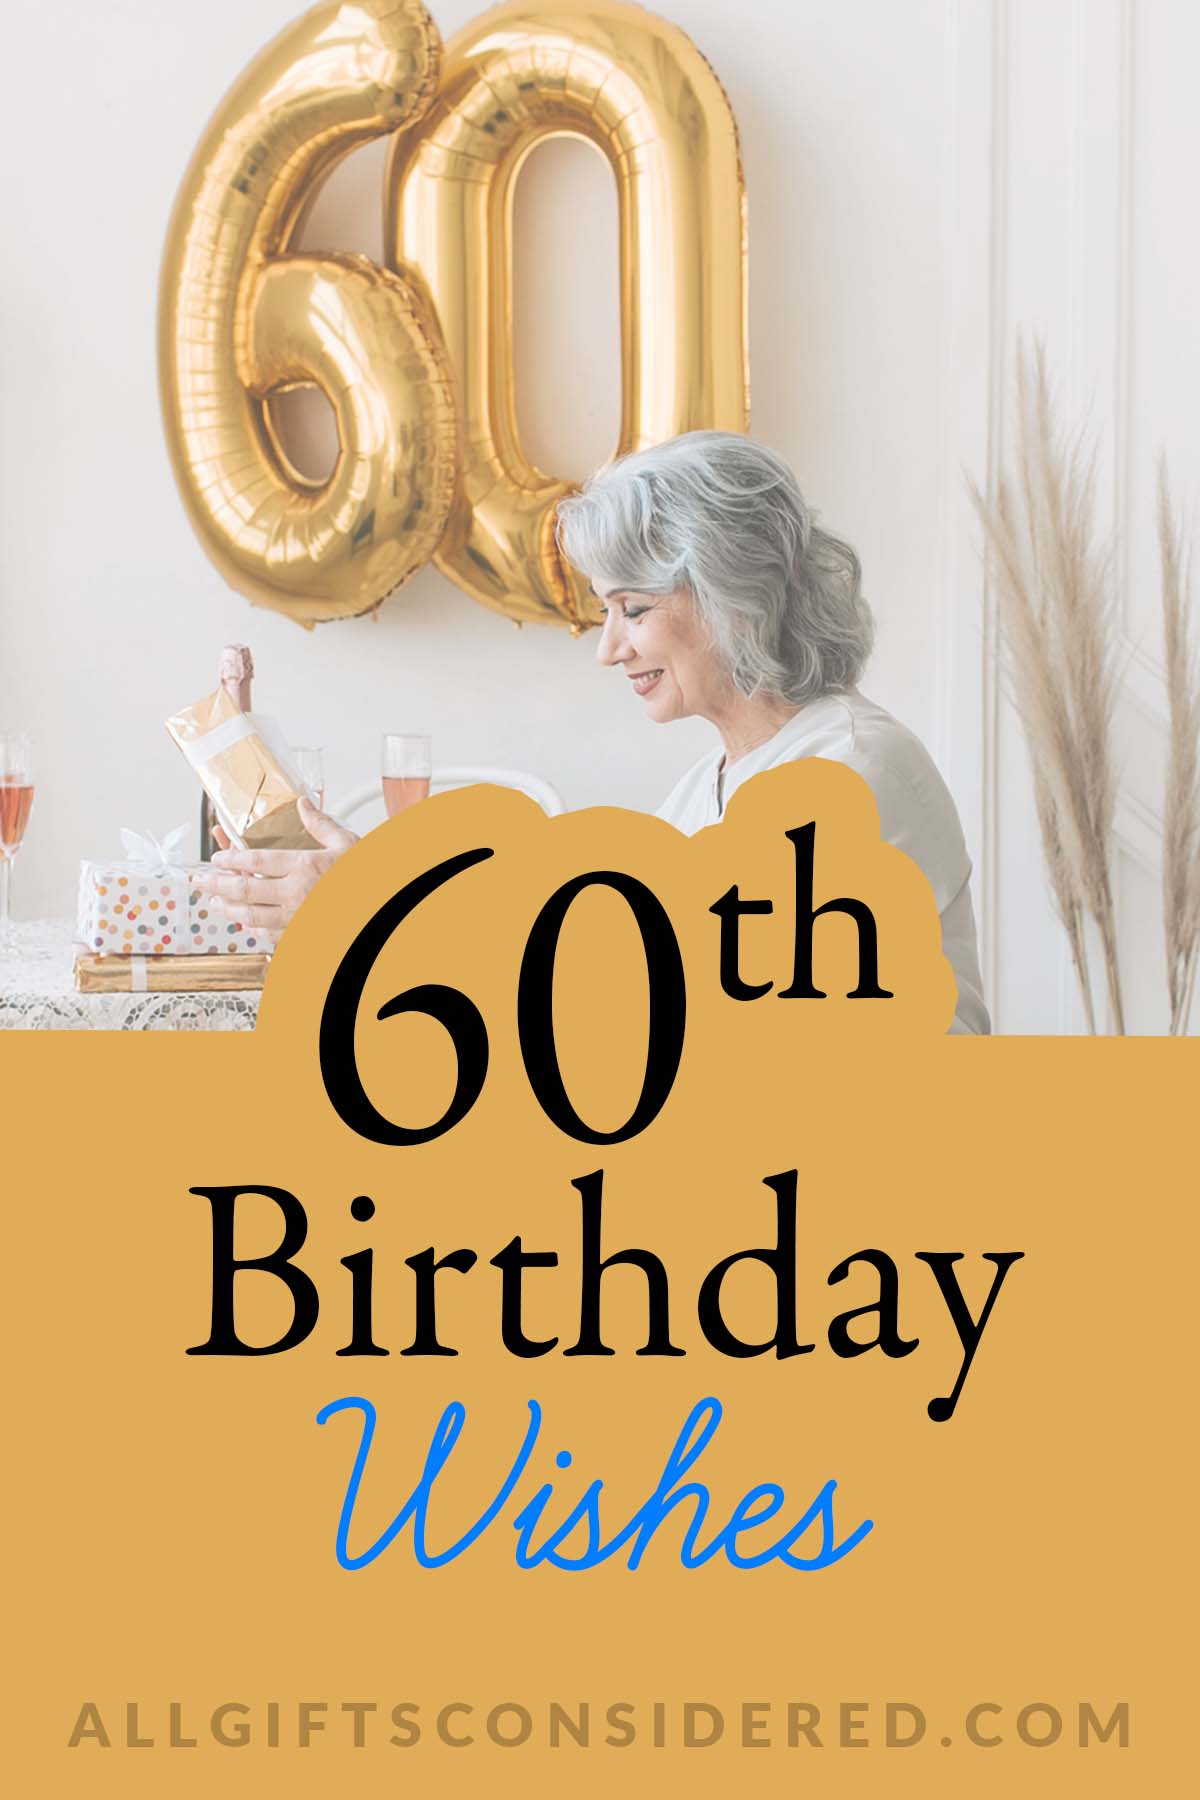 60th Birthday Wishes - Feat Image